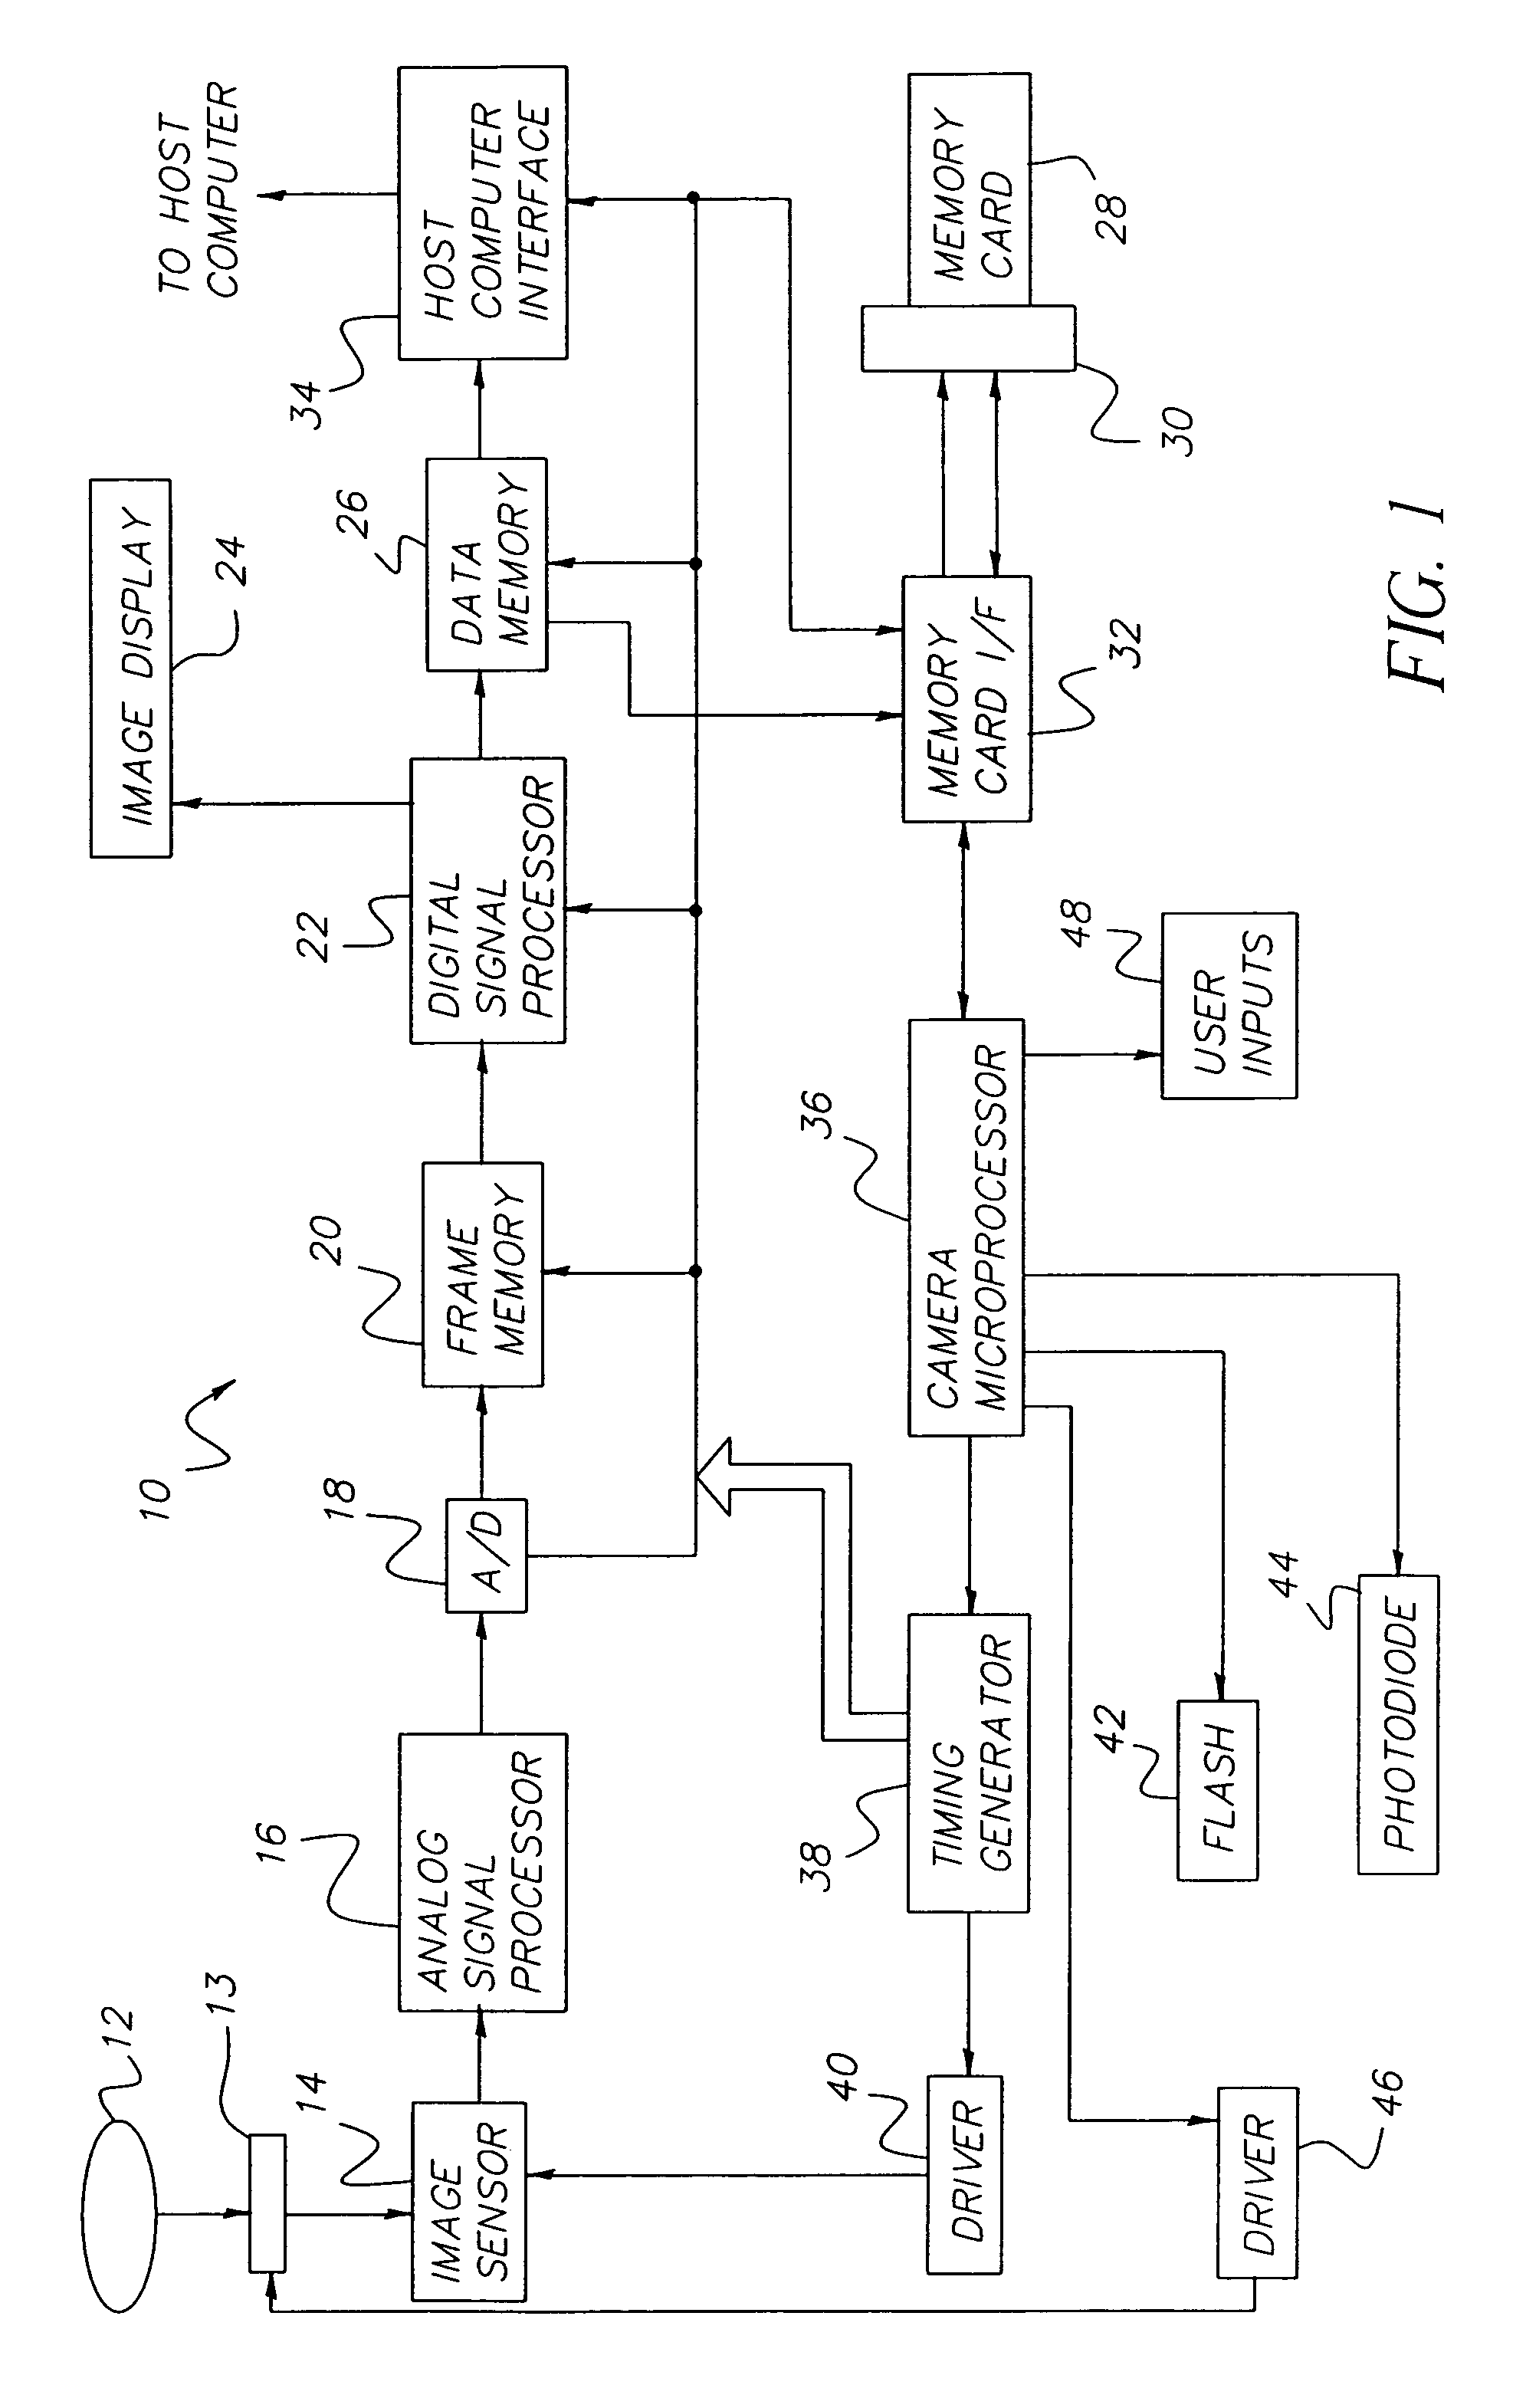 Apparatus and method for processing digital images having eye color defects